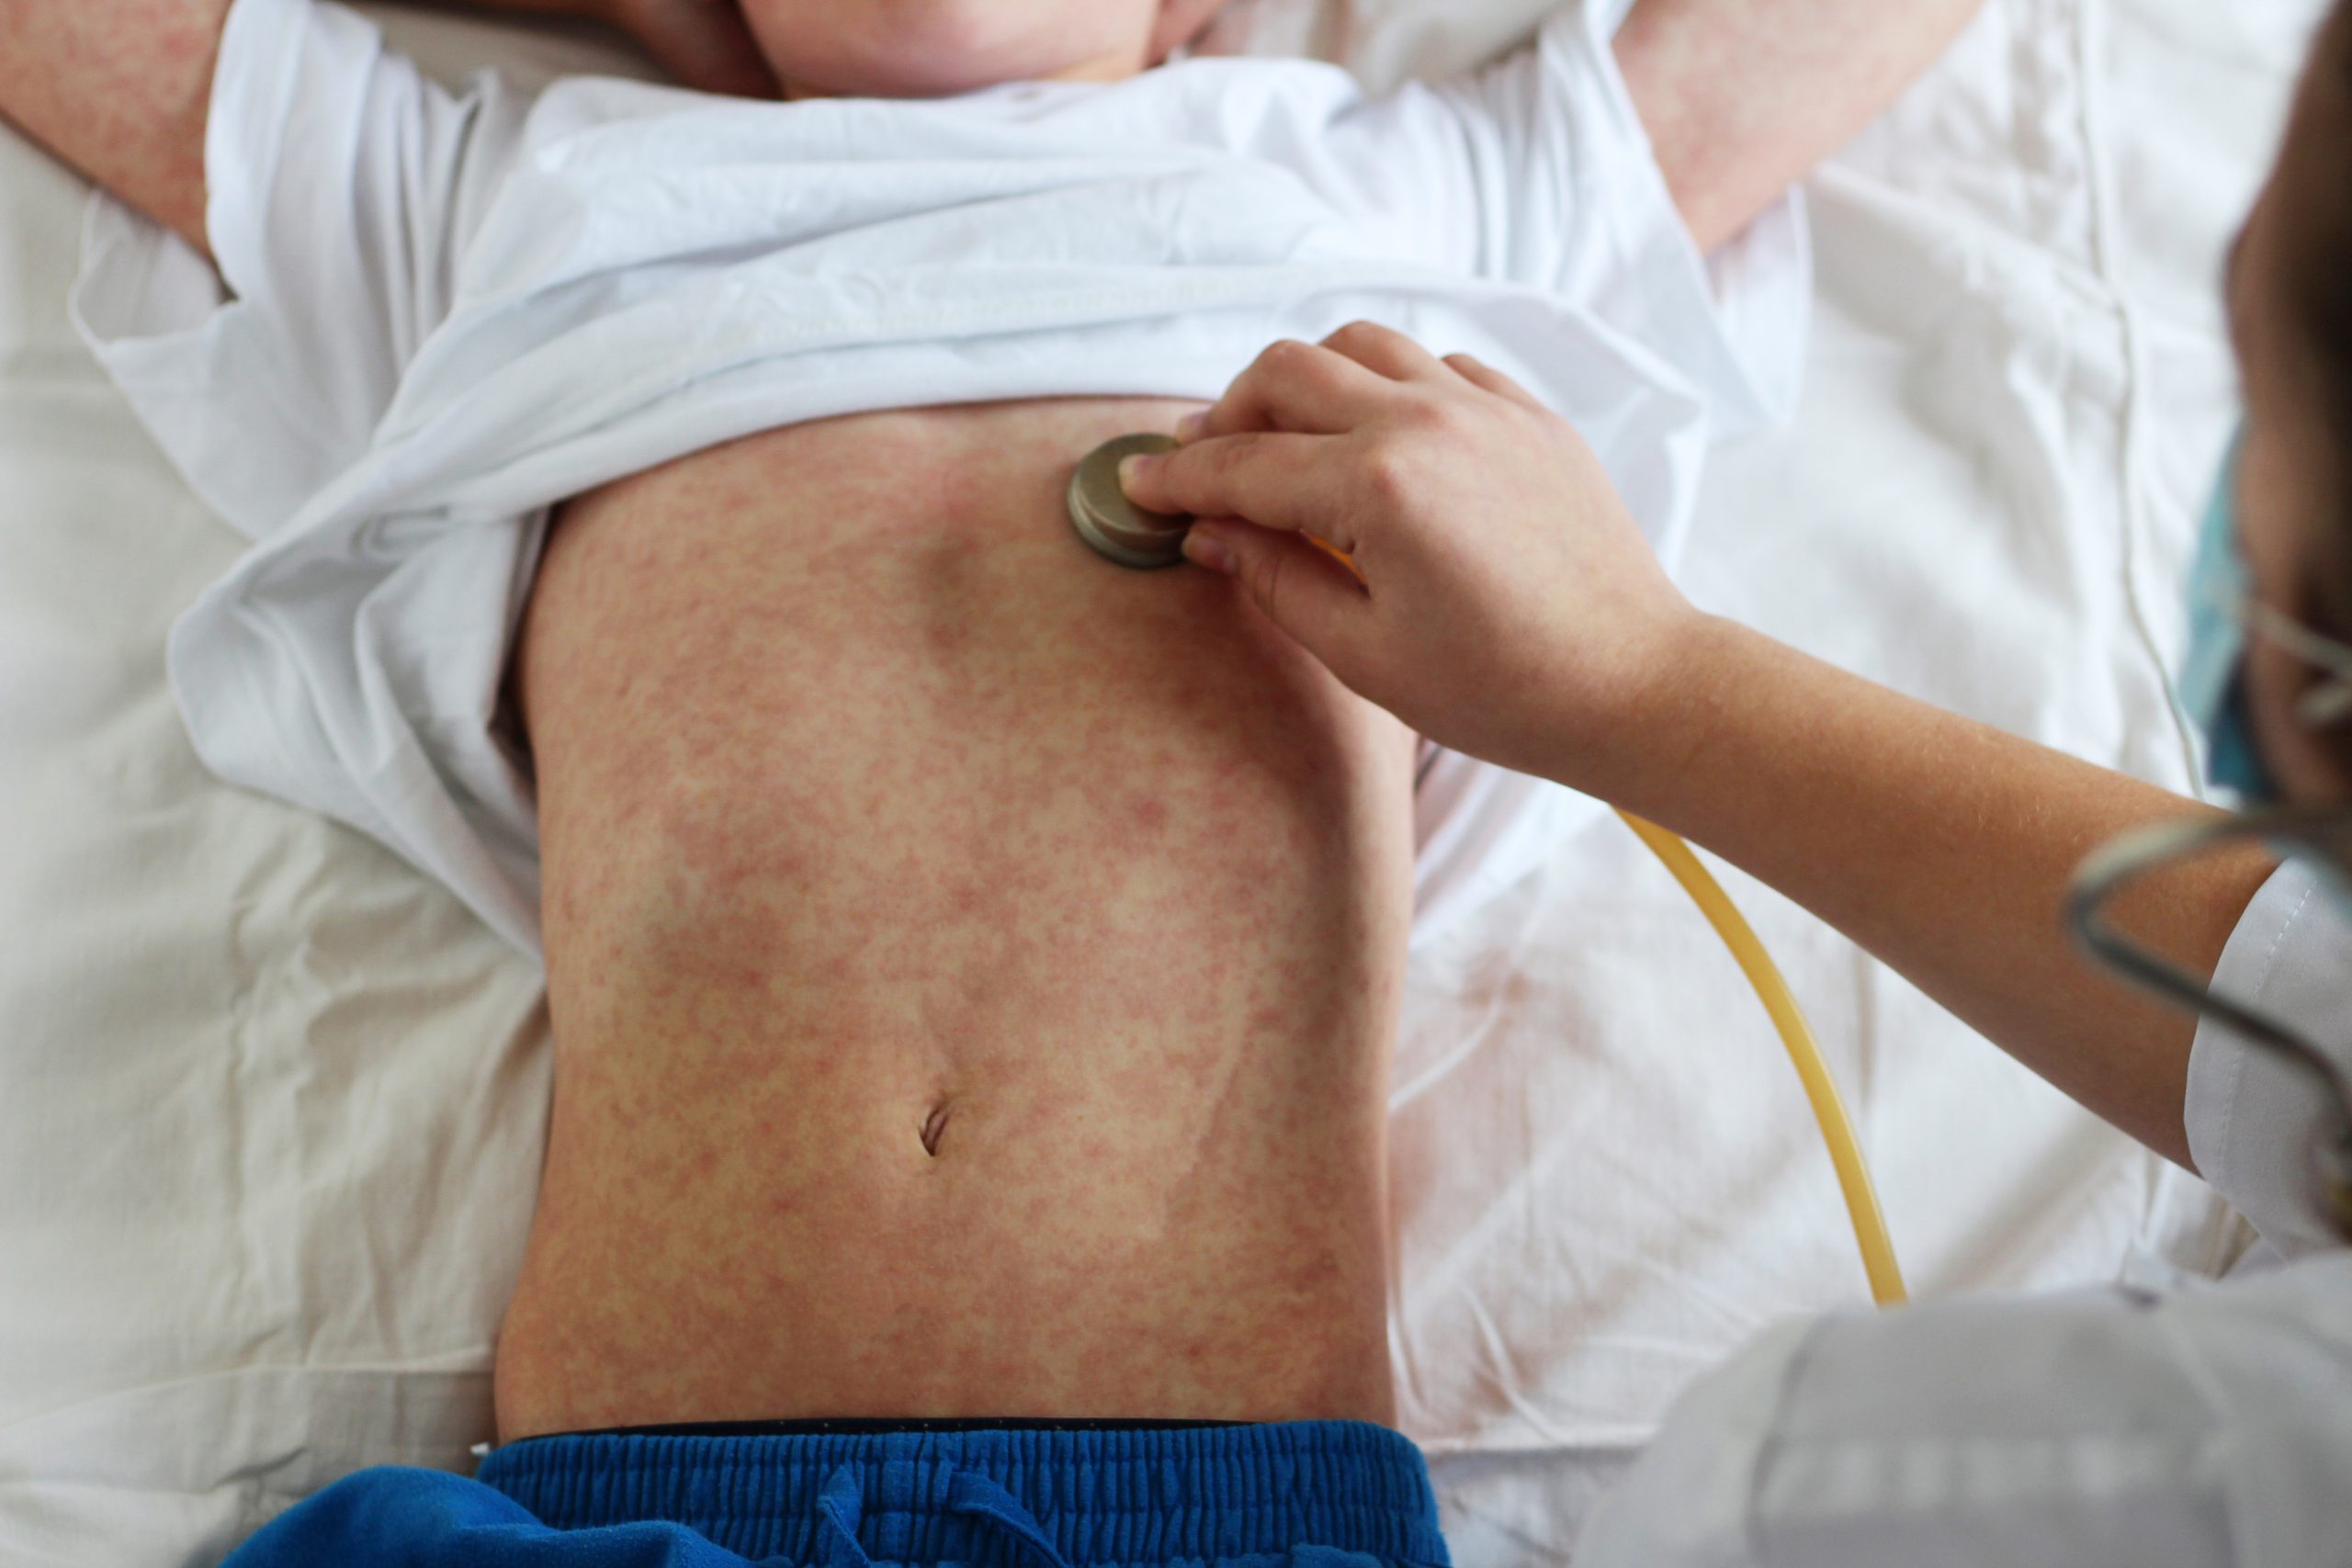 Why People Born Between 1966 and 1994 Are at Greater Risk of Measles – and what to Do About It